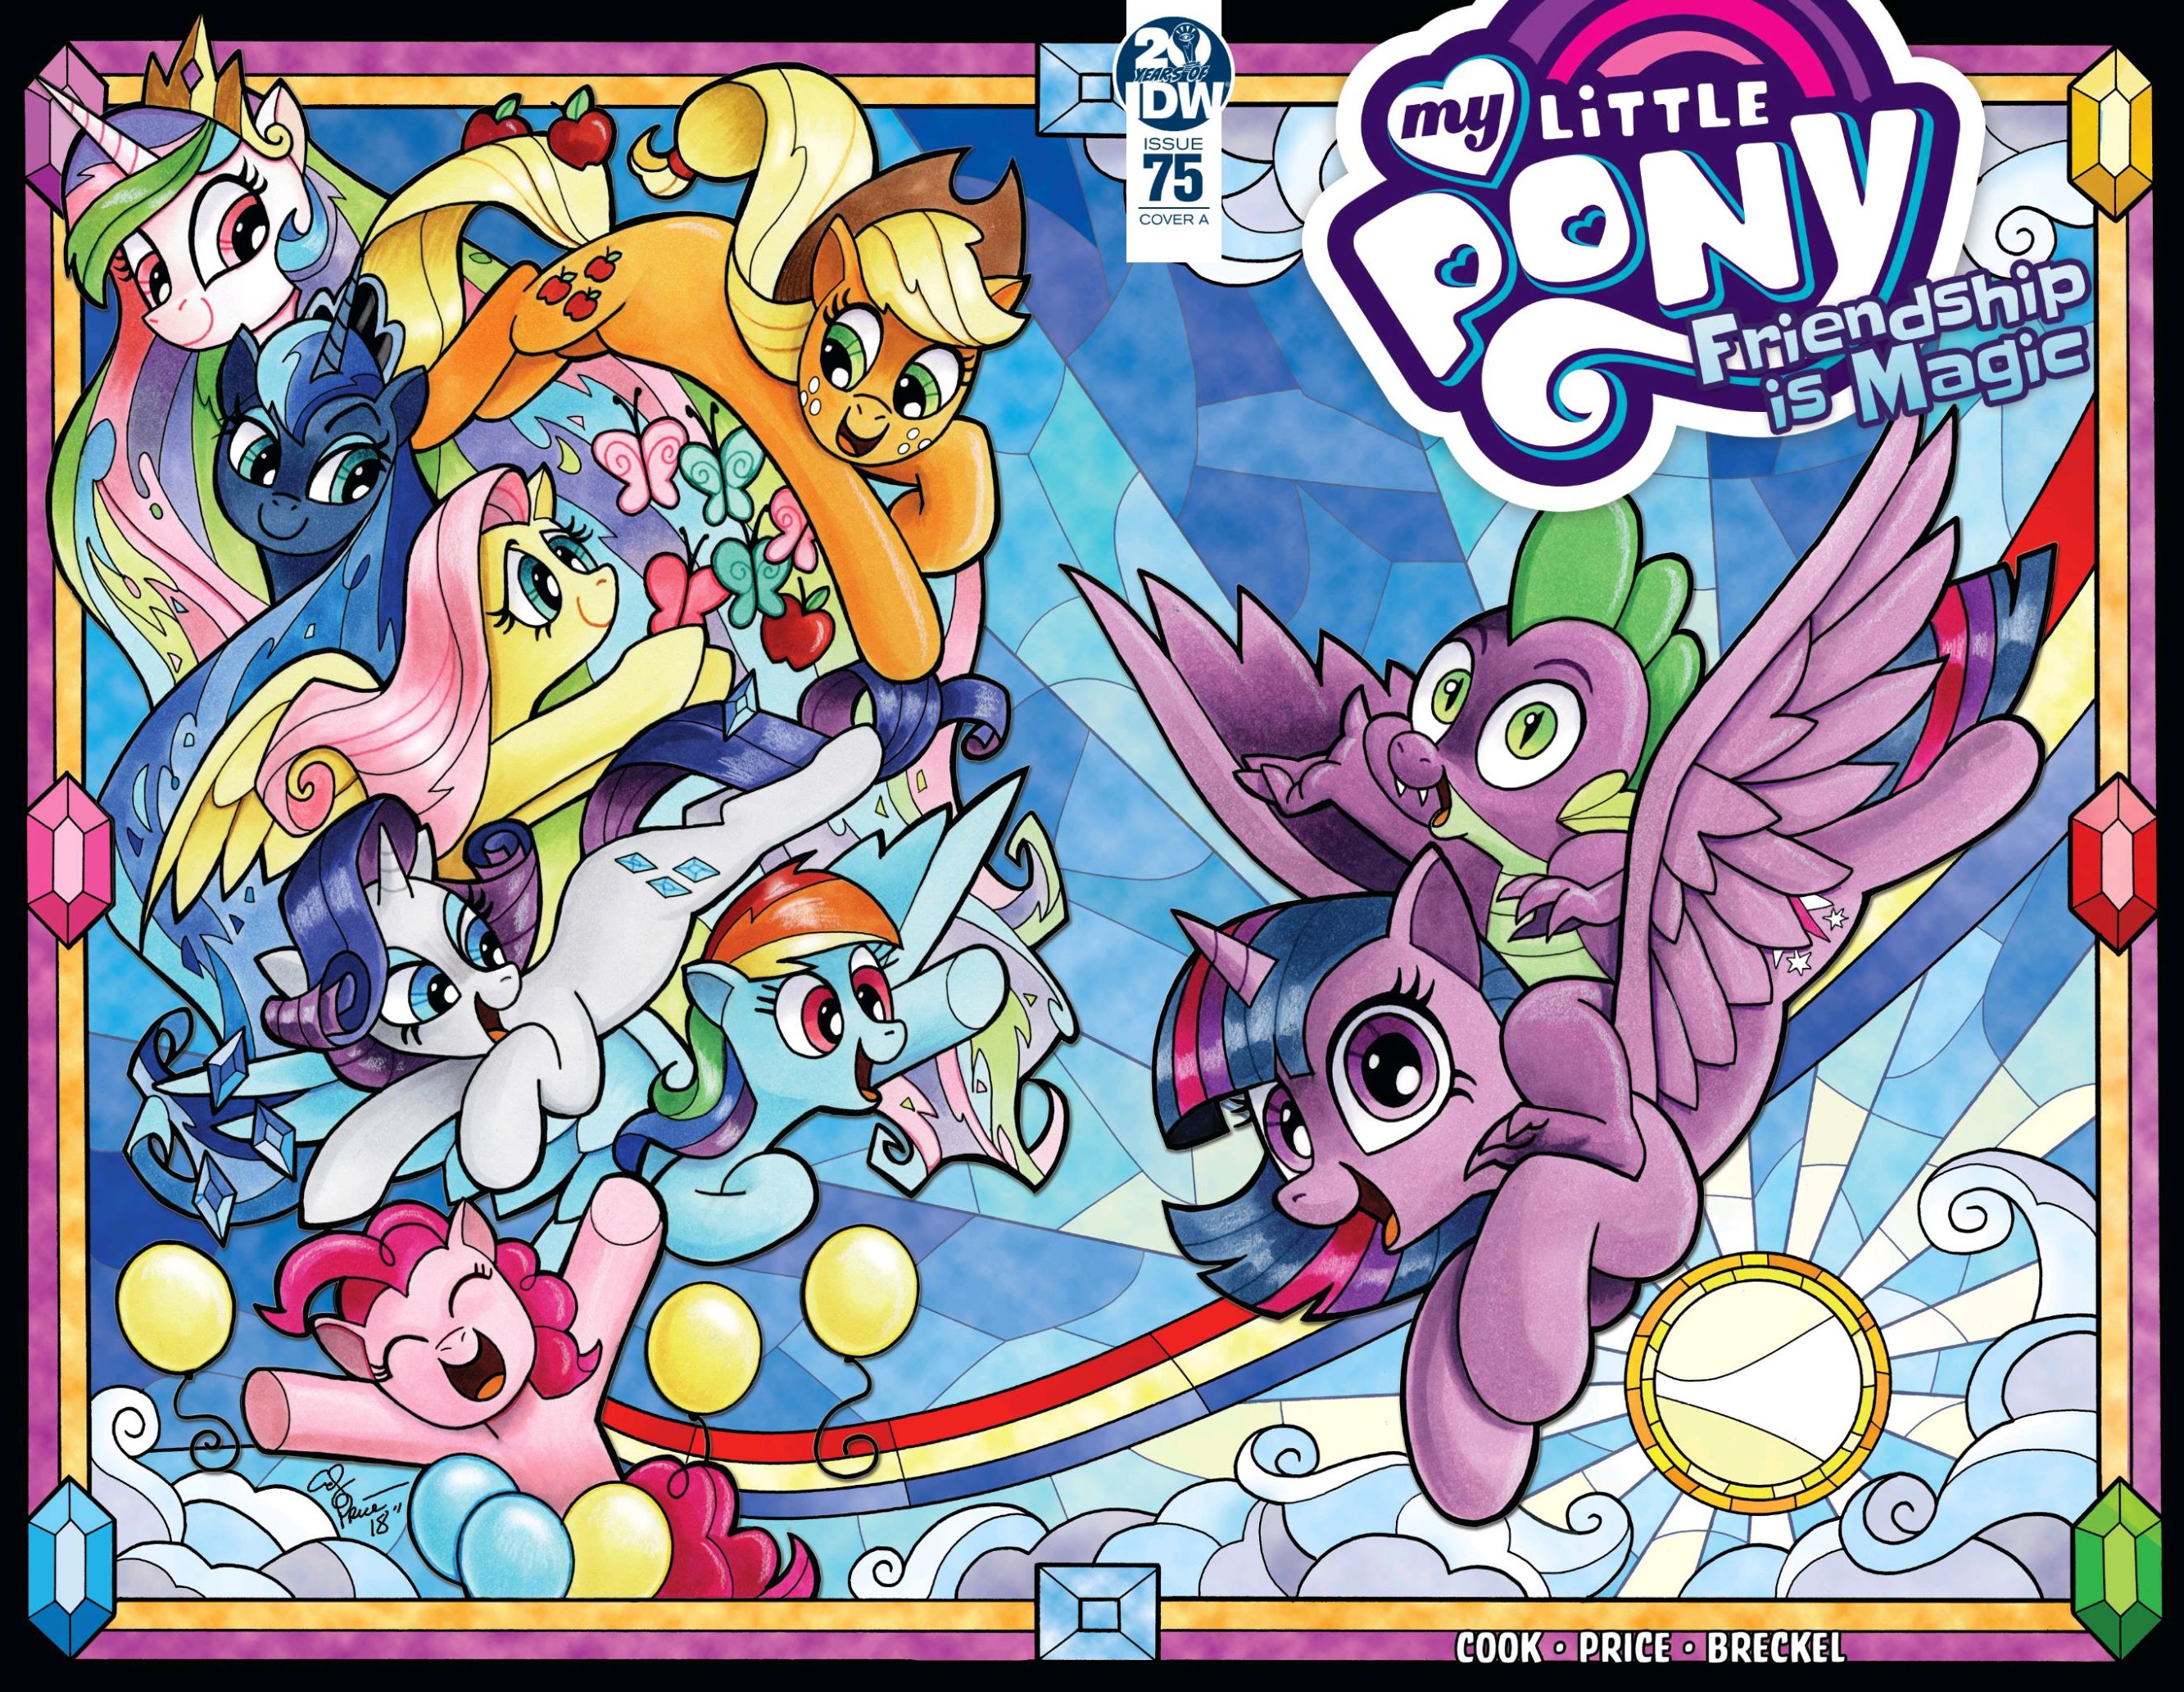 Read online My Little Pony: Friendship is Magic comic -  Issue #75 - 2